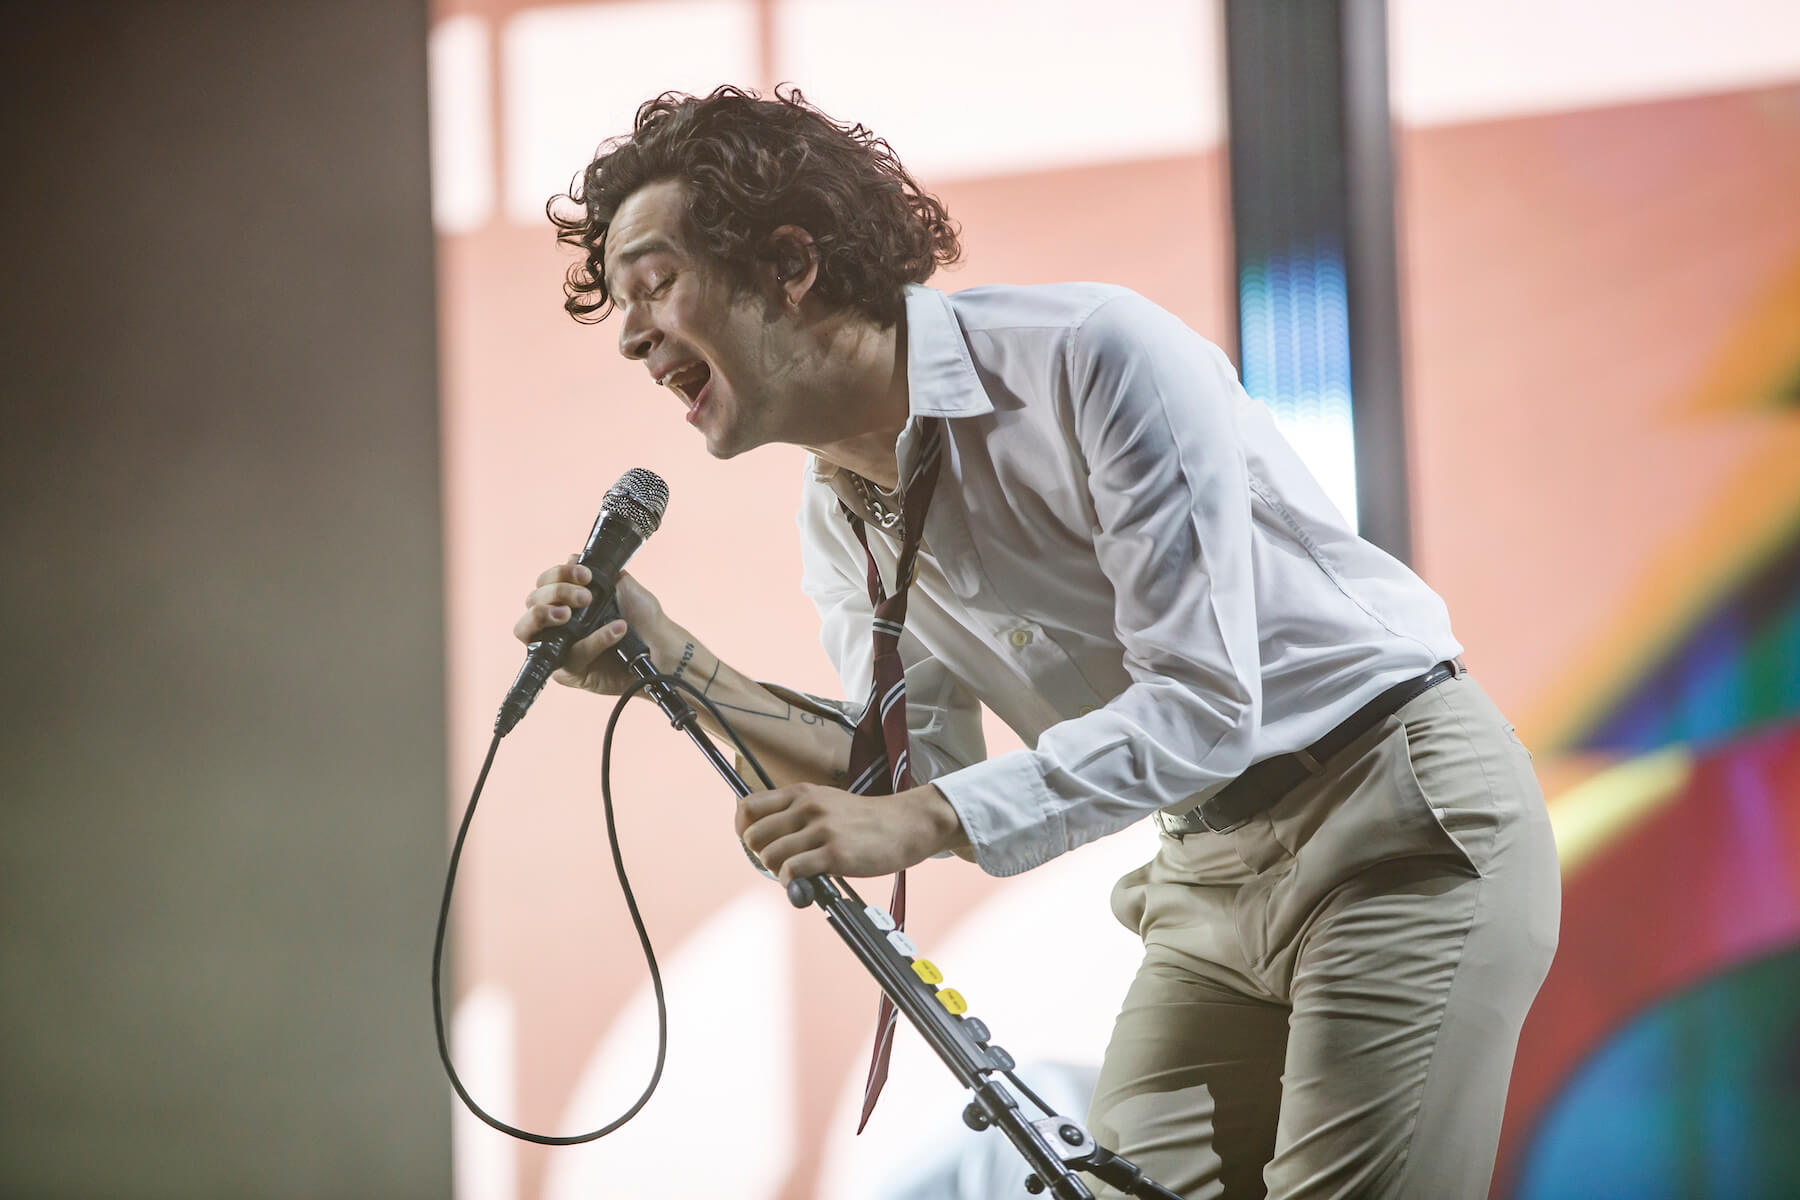 'The 1975' frontman Matty Healy singing into a microphone